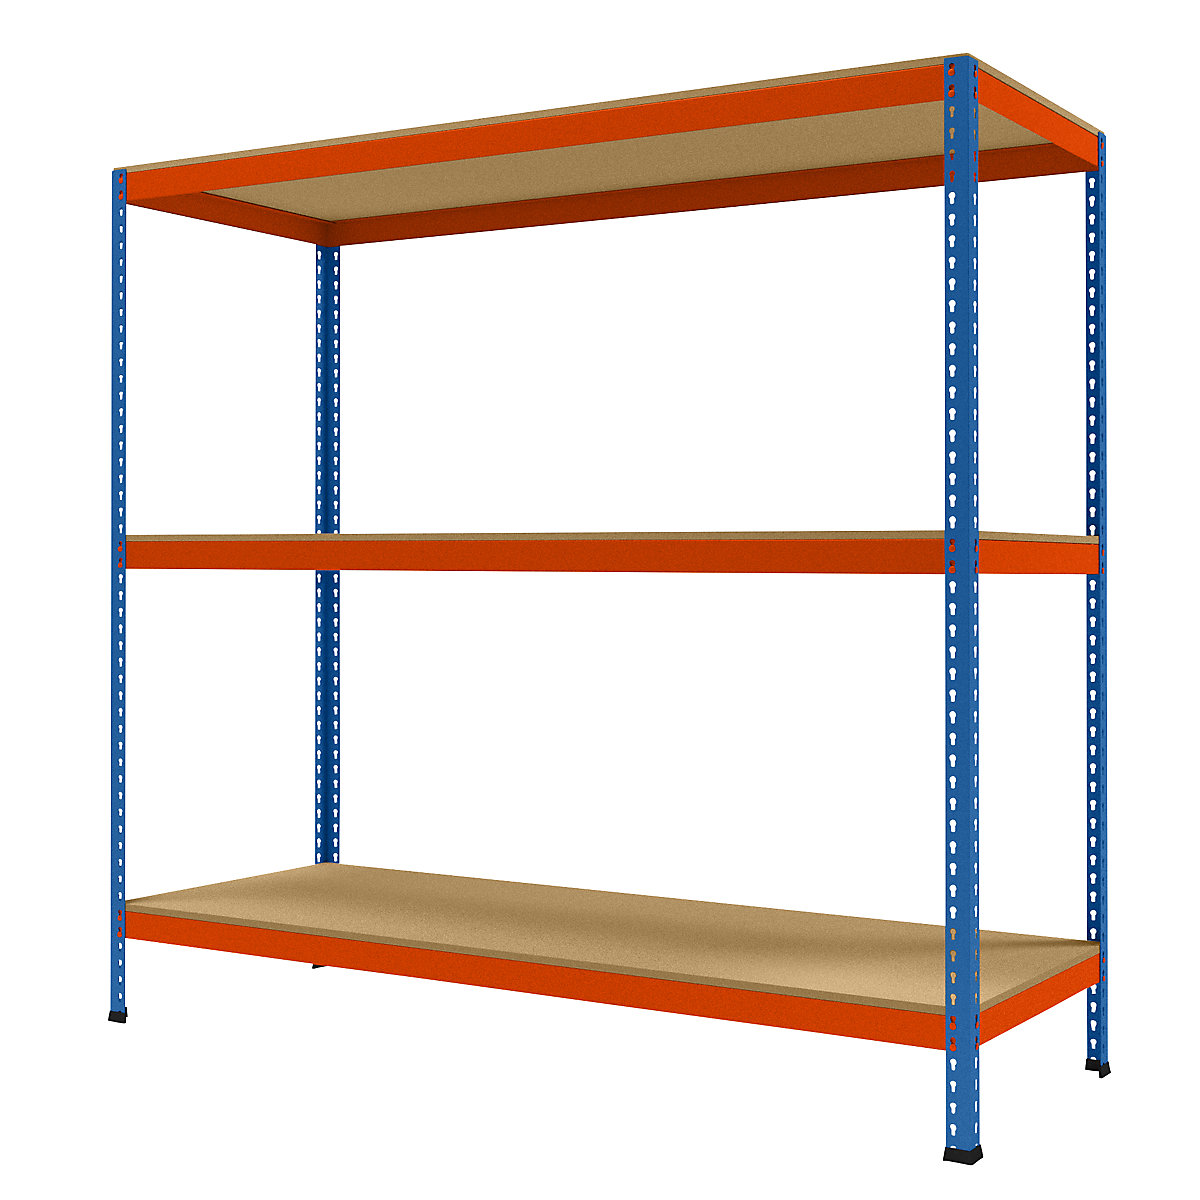 Wide span heavy duty shelving, height 1981 mm, overall depth 773 mm, width 2146 mm